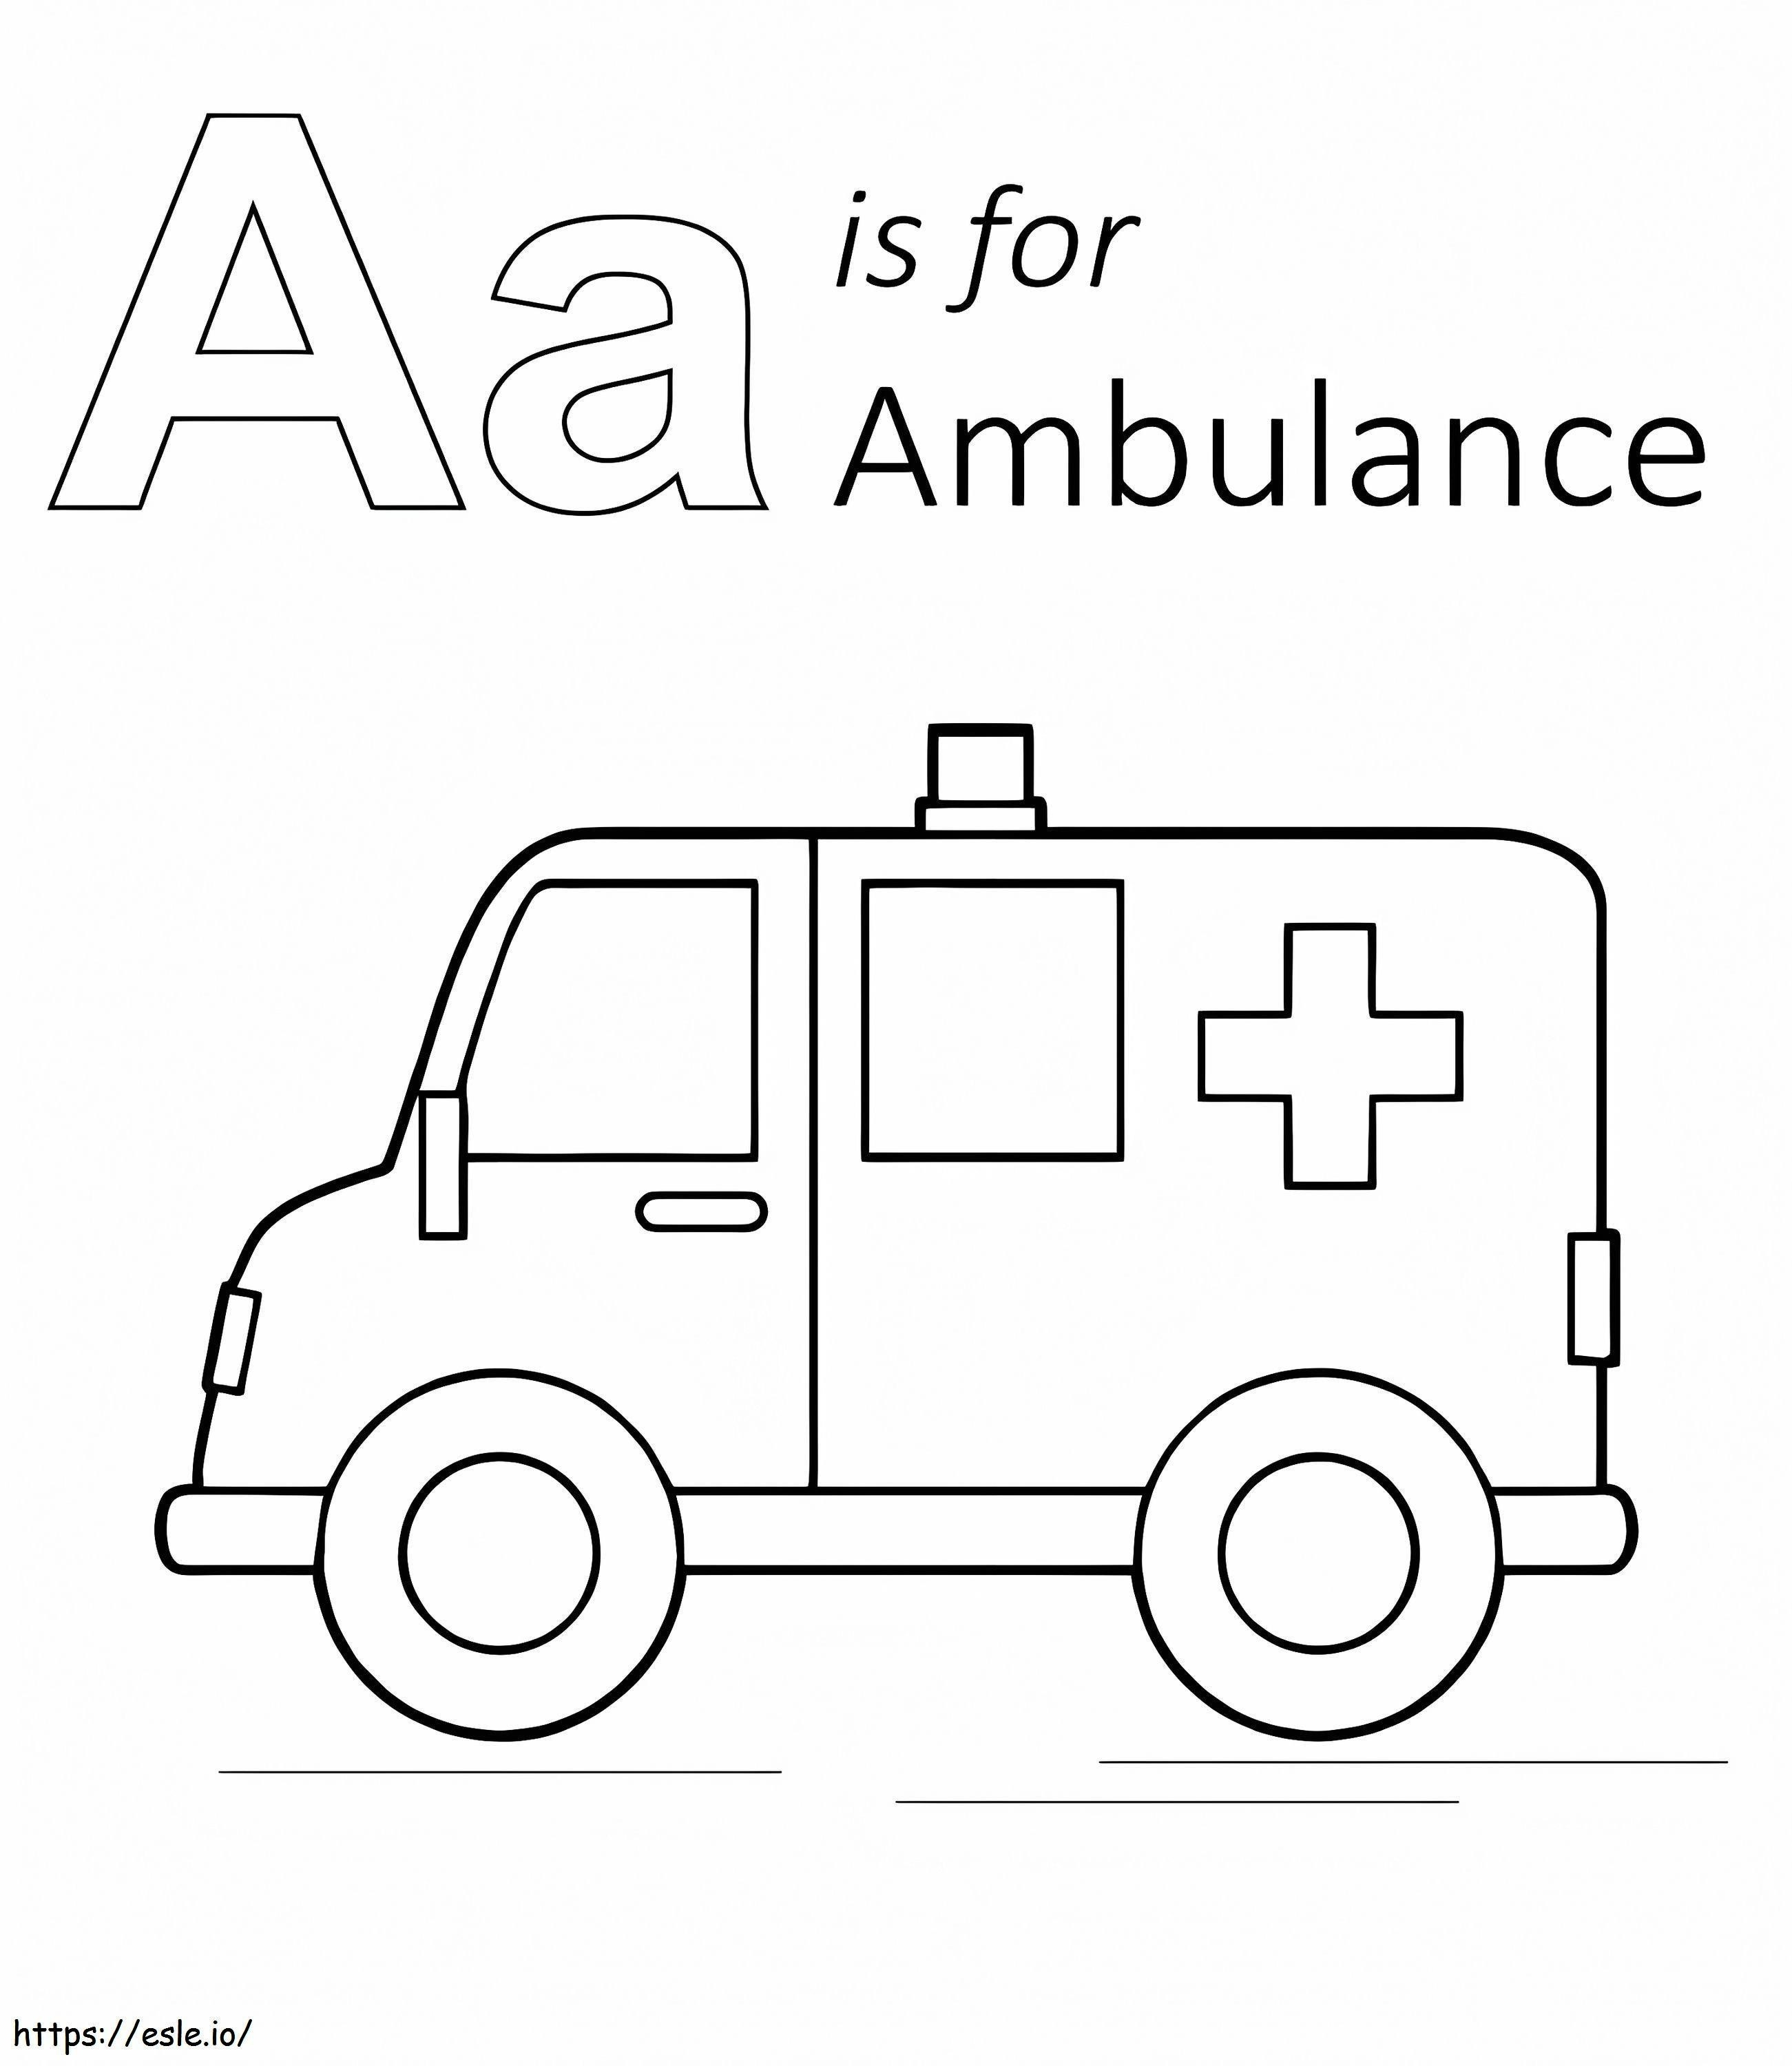 A Is For Ambulance coloring page